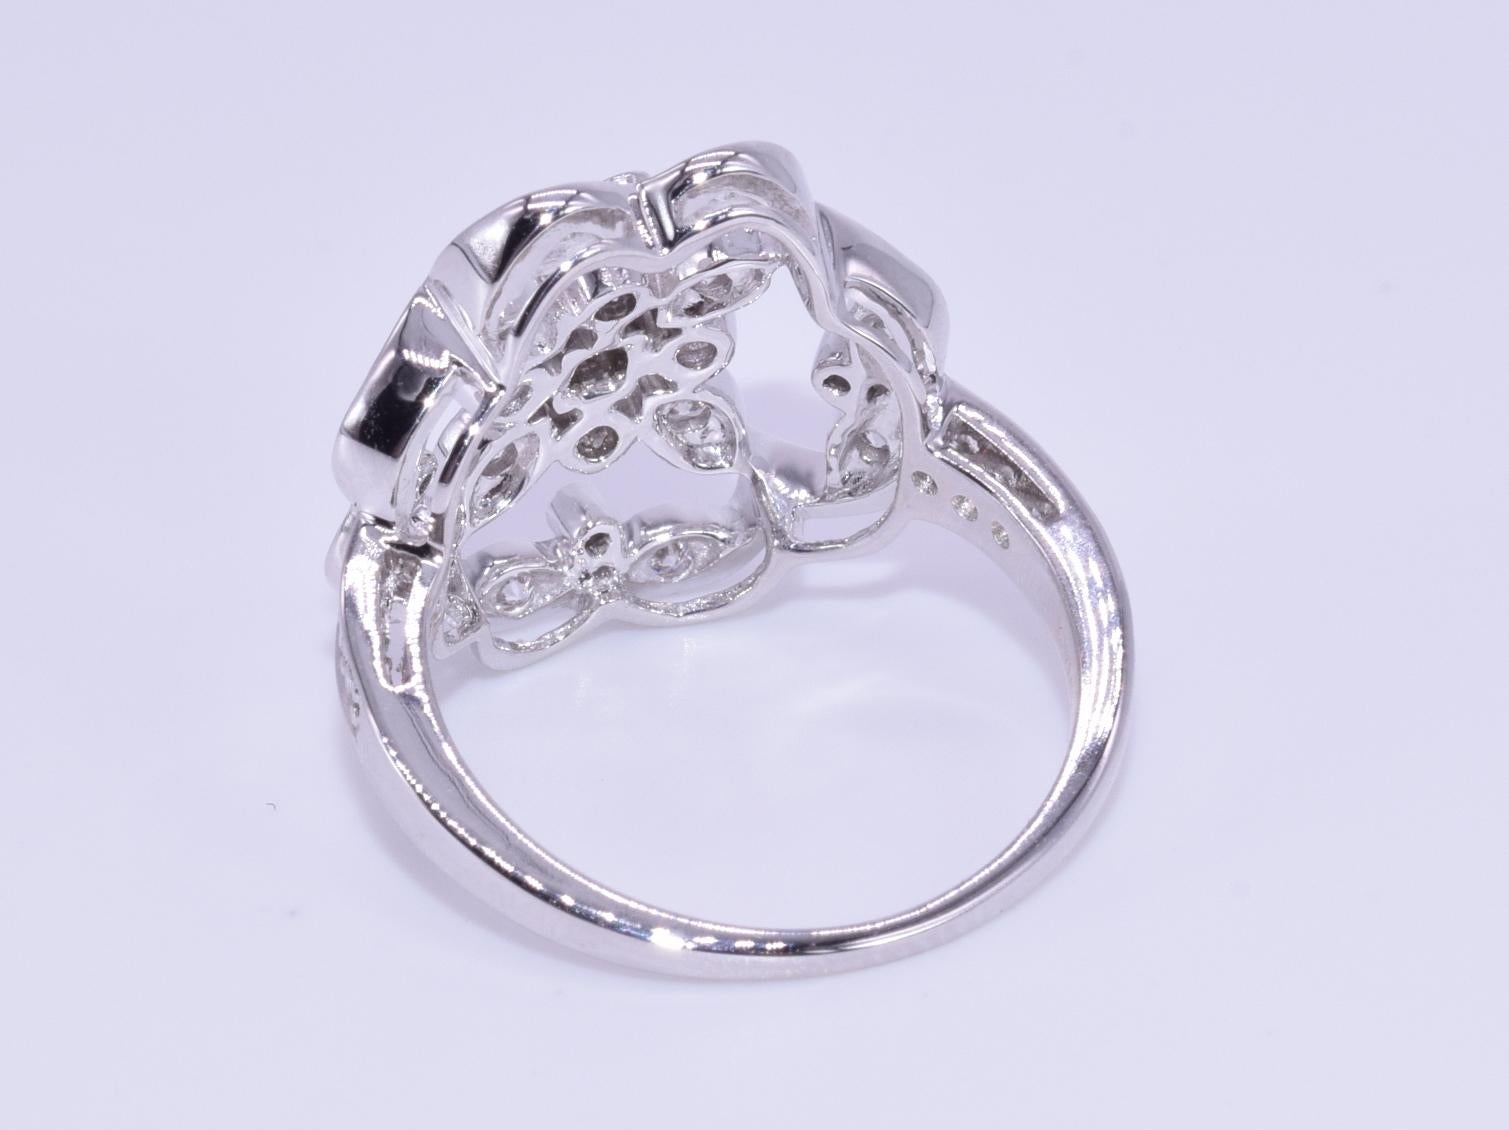 Contemporary Kwiat Diamond Ring from the Crochet Collection in 18 Karat White Gold